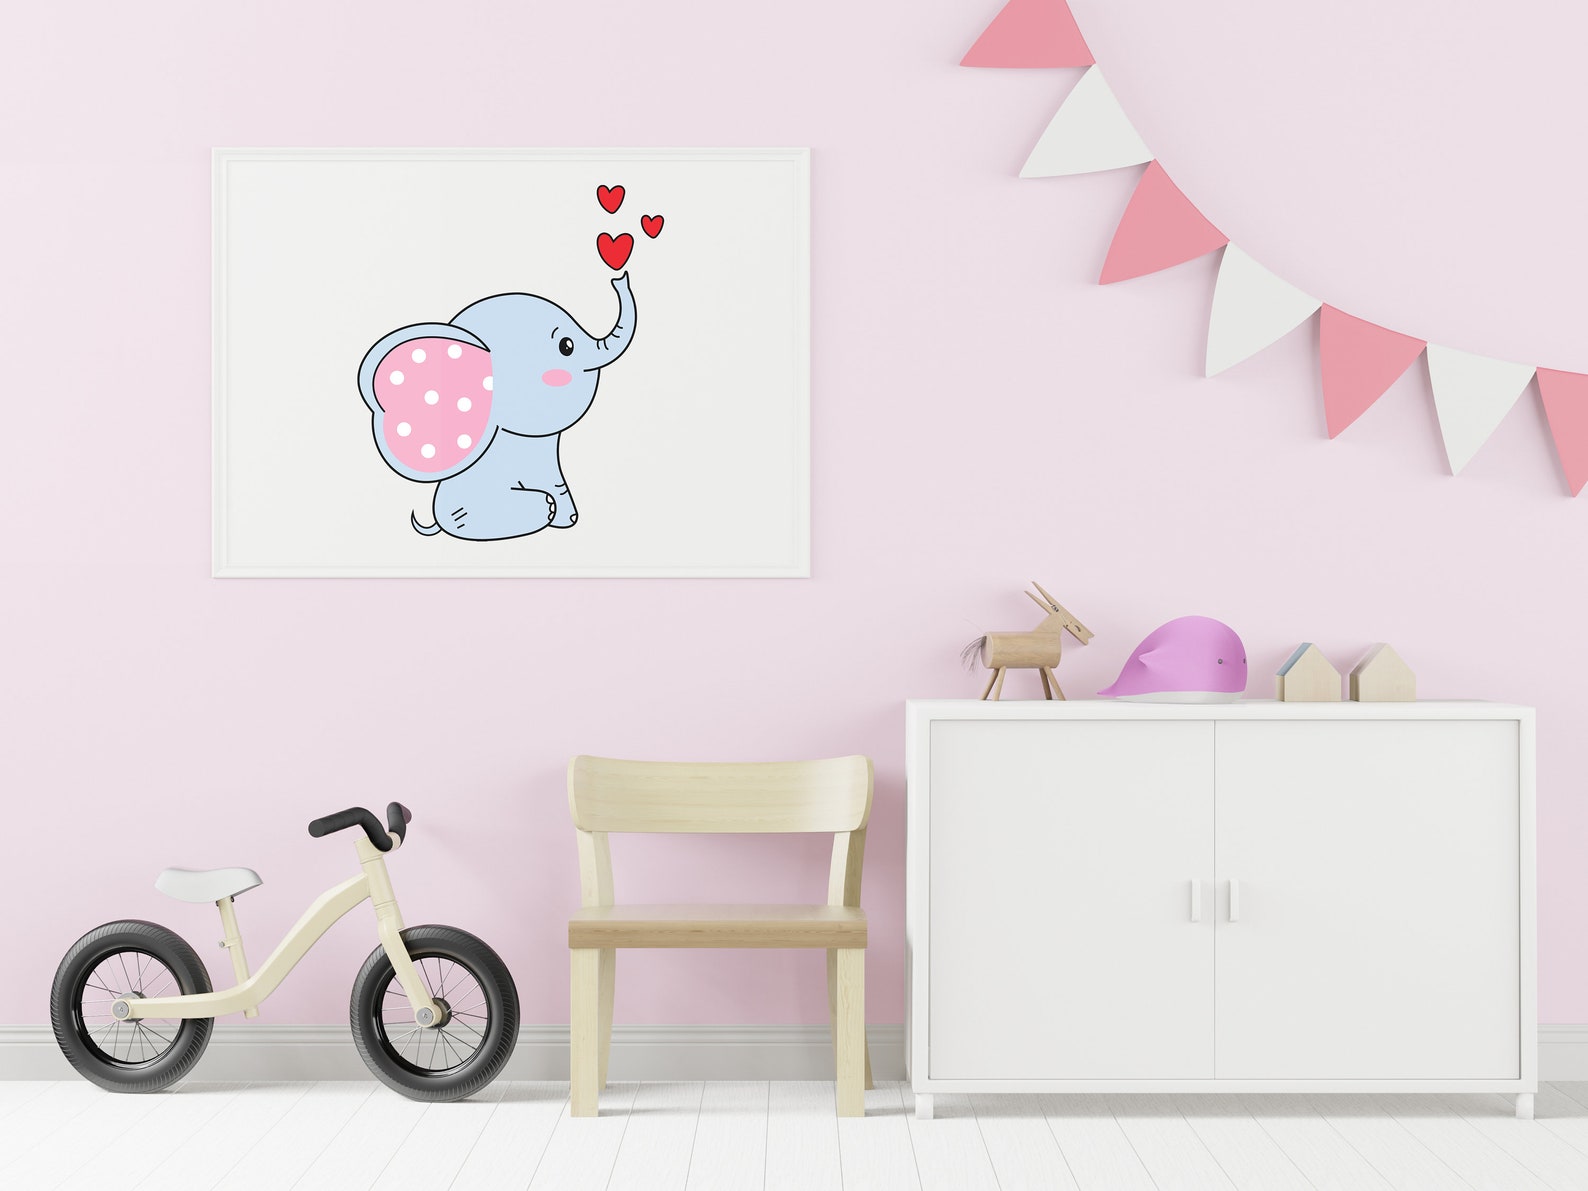 Child's room with a pink wall and white furniture.